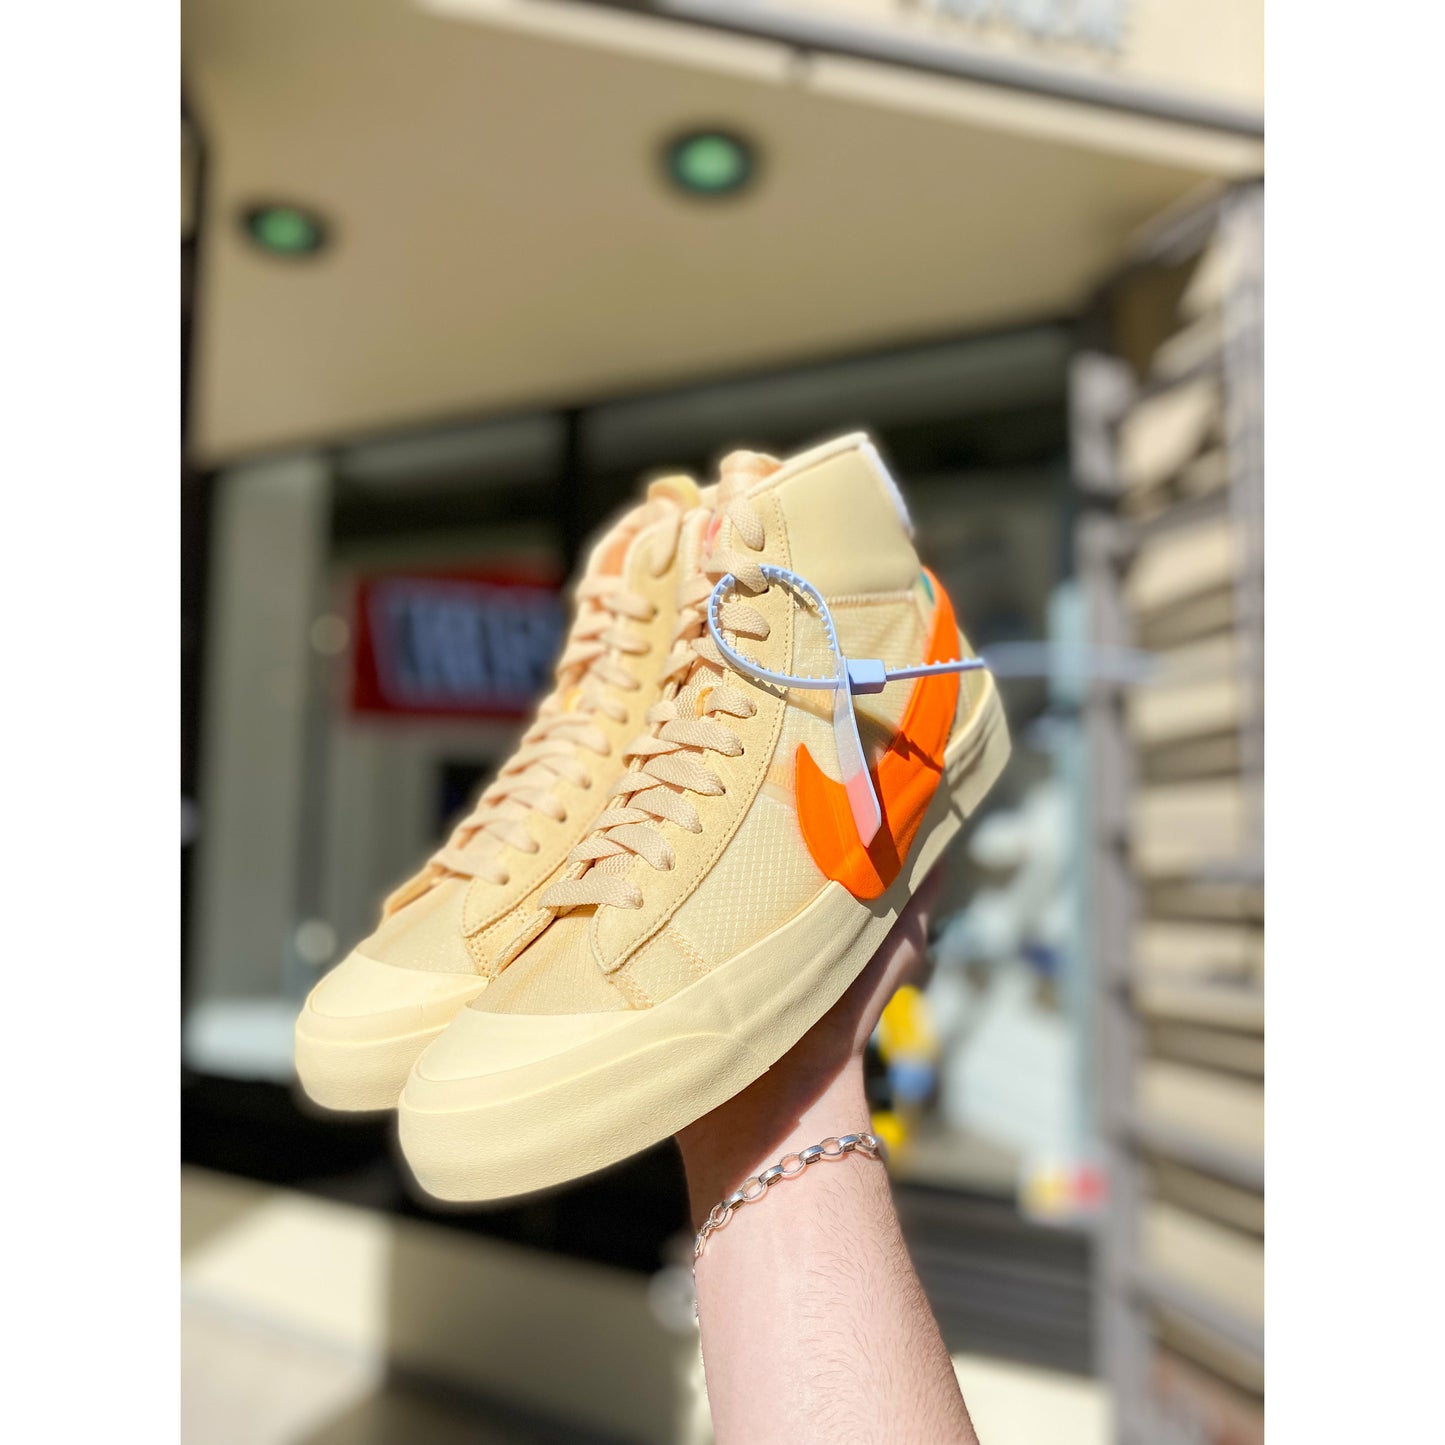 Nike Off White Blazer Mid All Hallow's Eve by Nike from £400.00